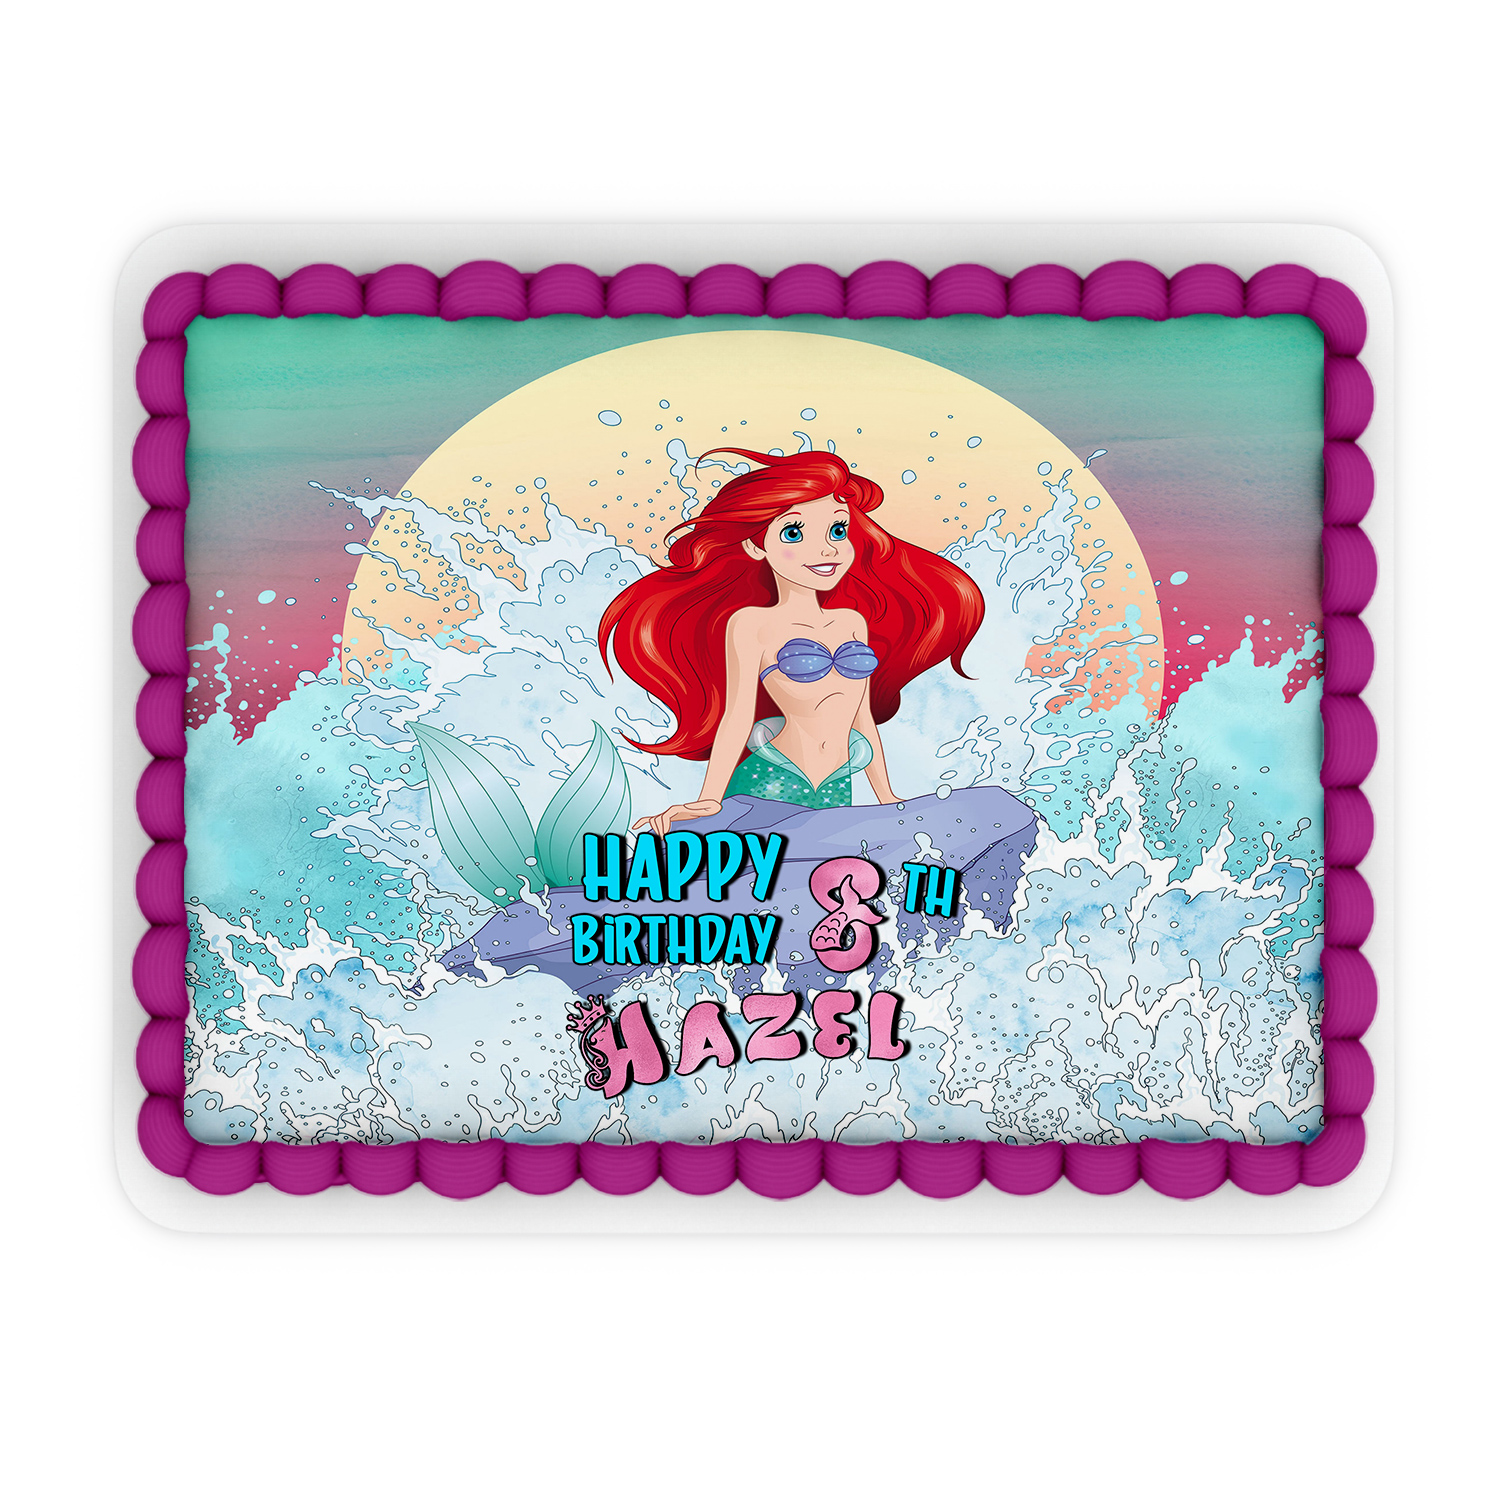 Rectangle mermaid themed personalized cake images